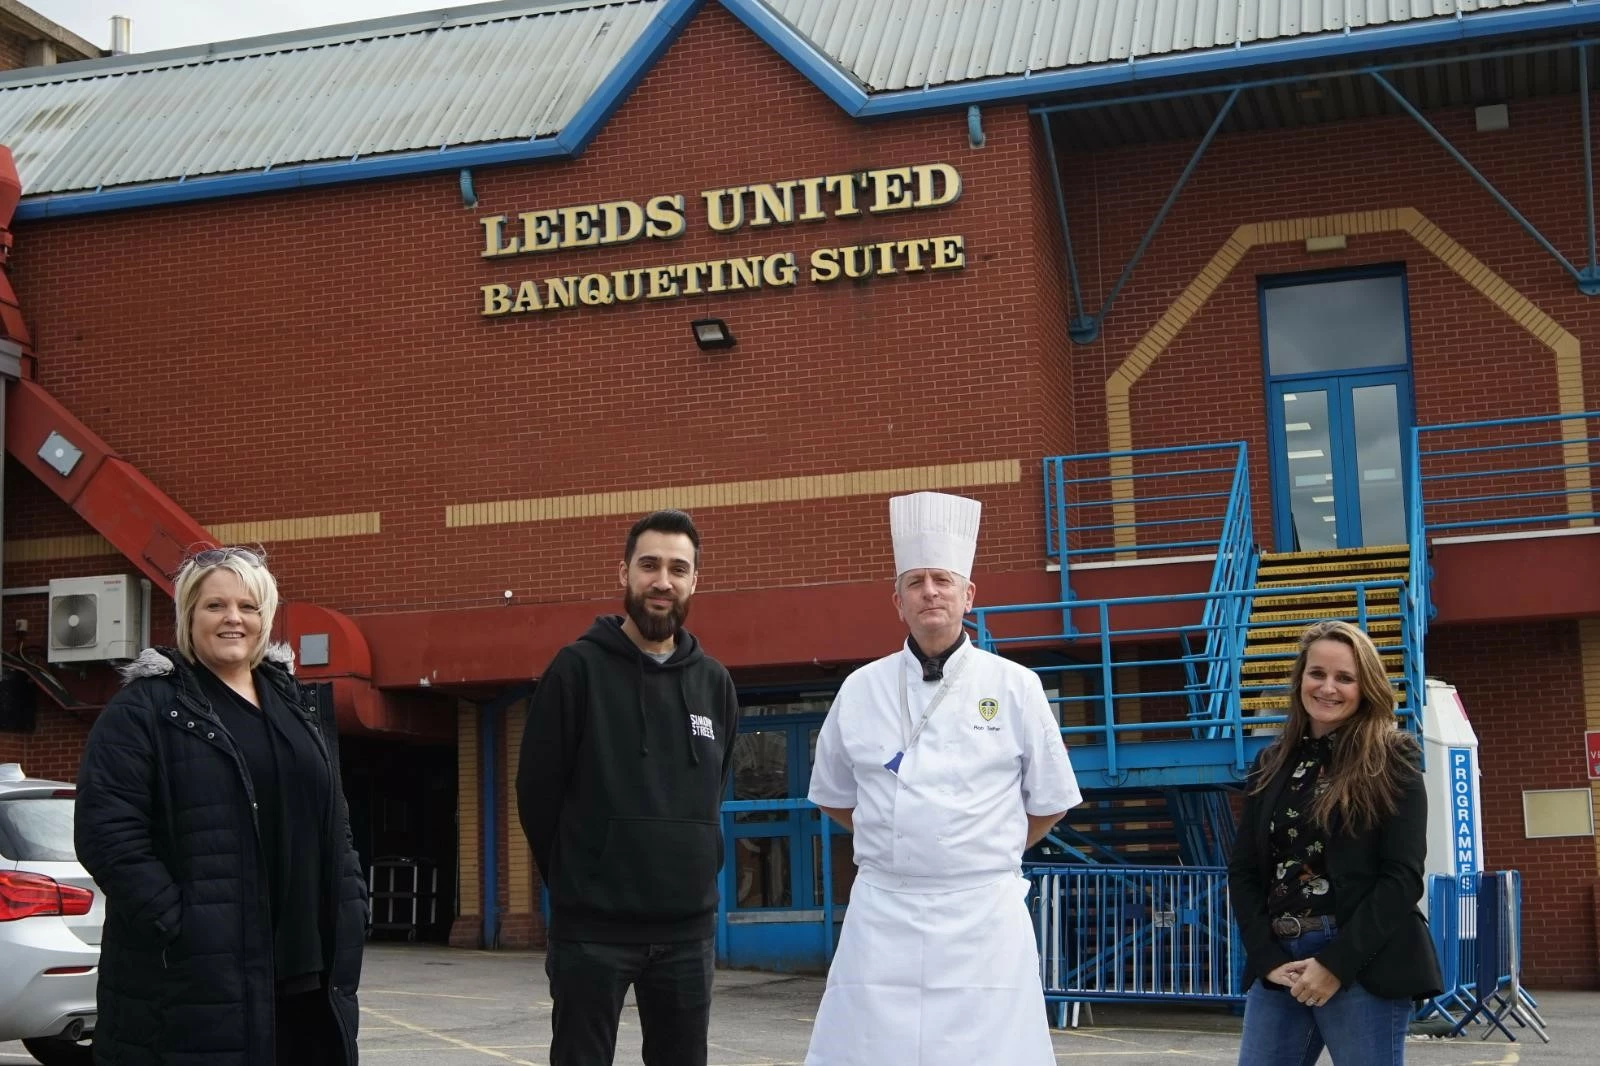 Yorkshire Choice Awards feeds the homeless with food from postponed event